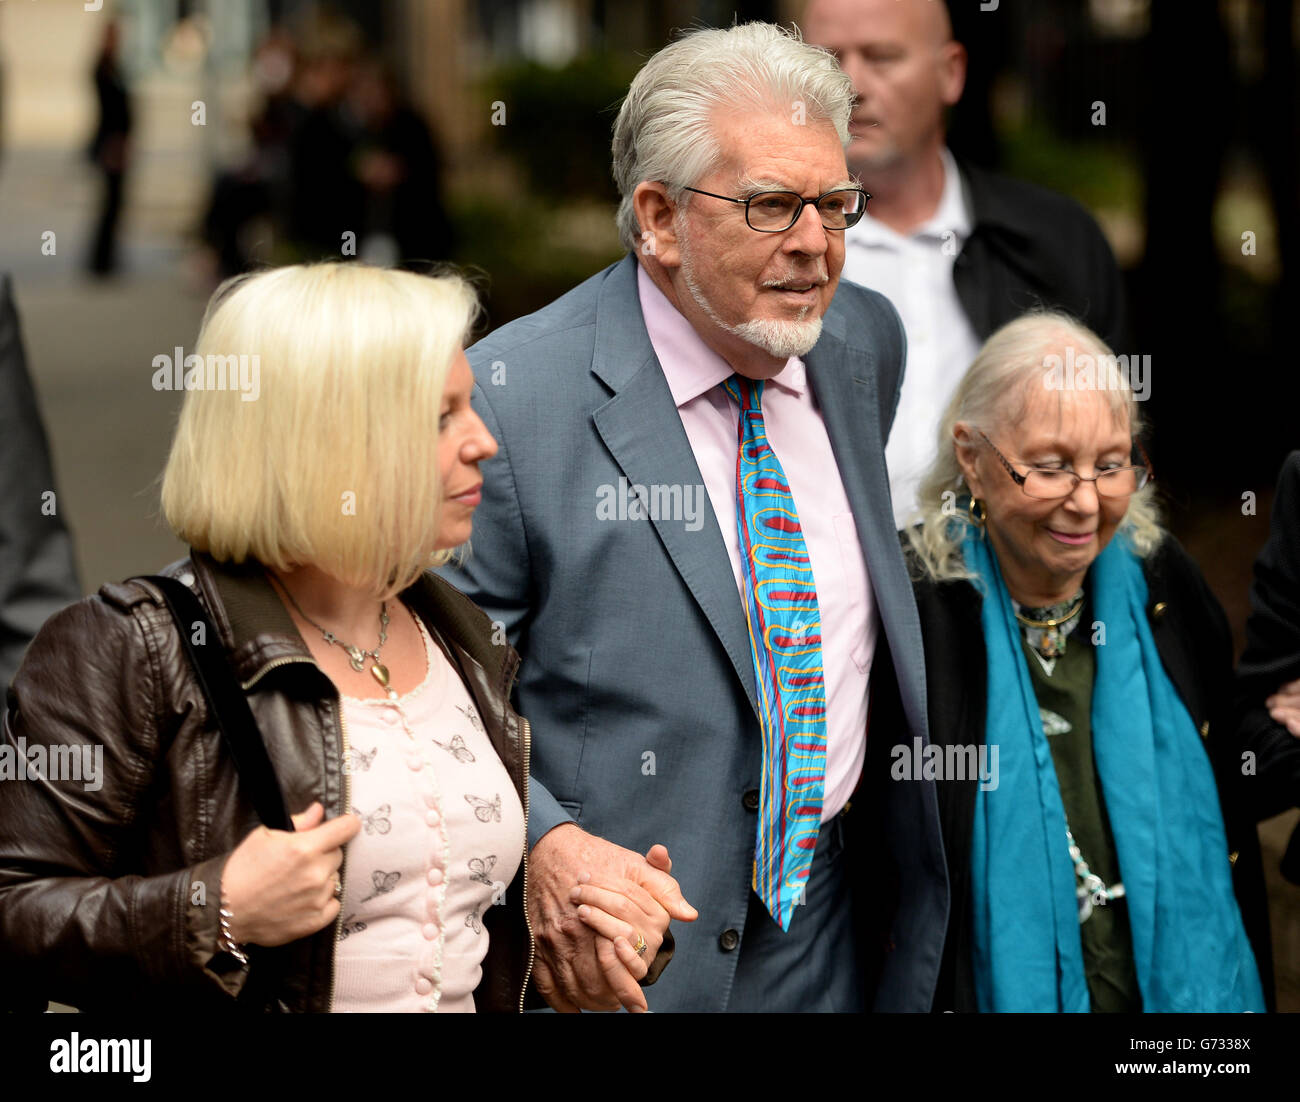 Veteran entertainer Rolf Harris (centre) arrives at Southwark Crown Court, London, with daughter Bindi (left) and wife Alwen, where he denies 12 counts of indecent assault between 1968 and 1986. Stock Photo